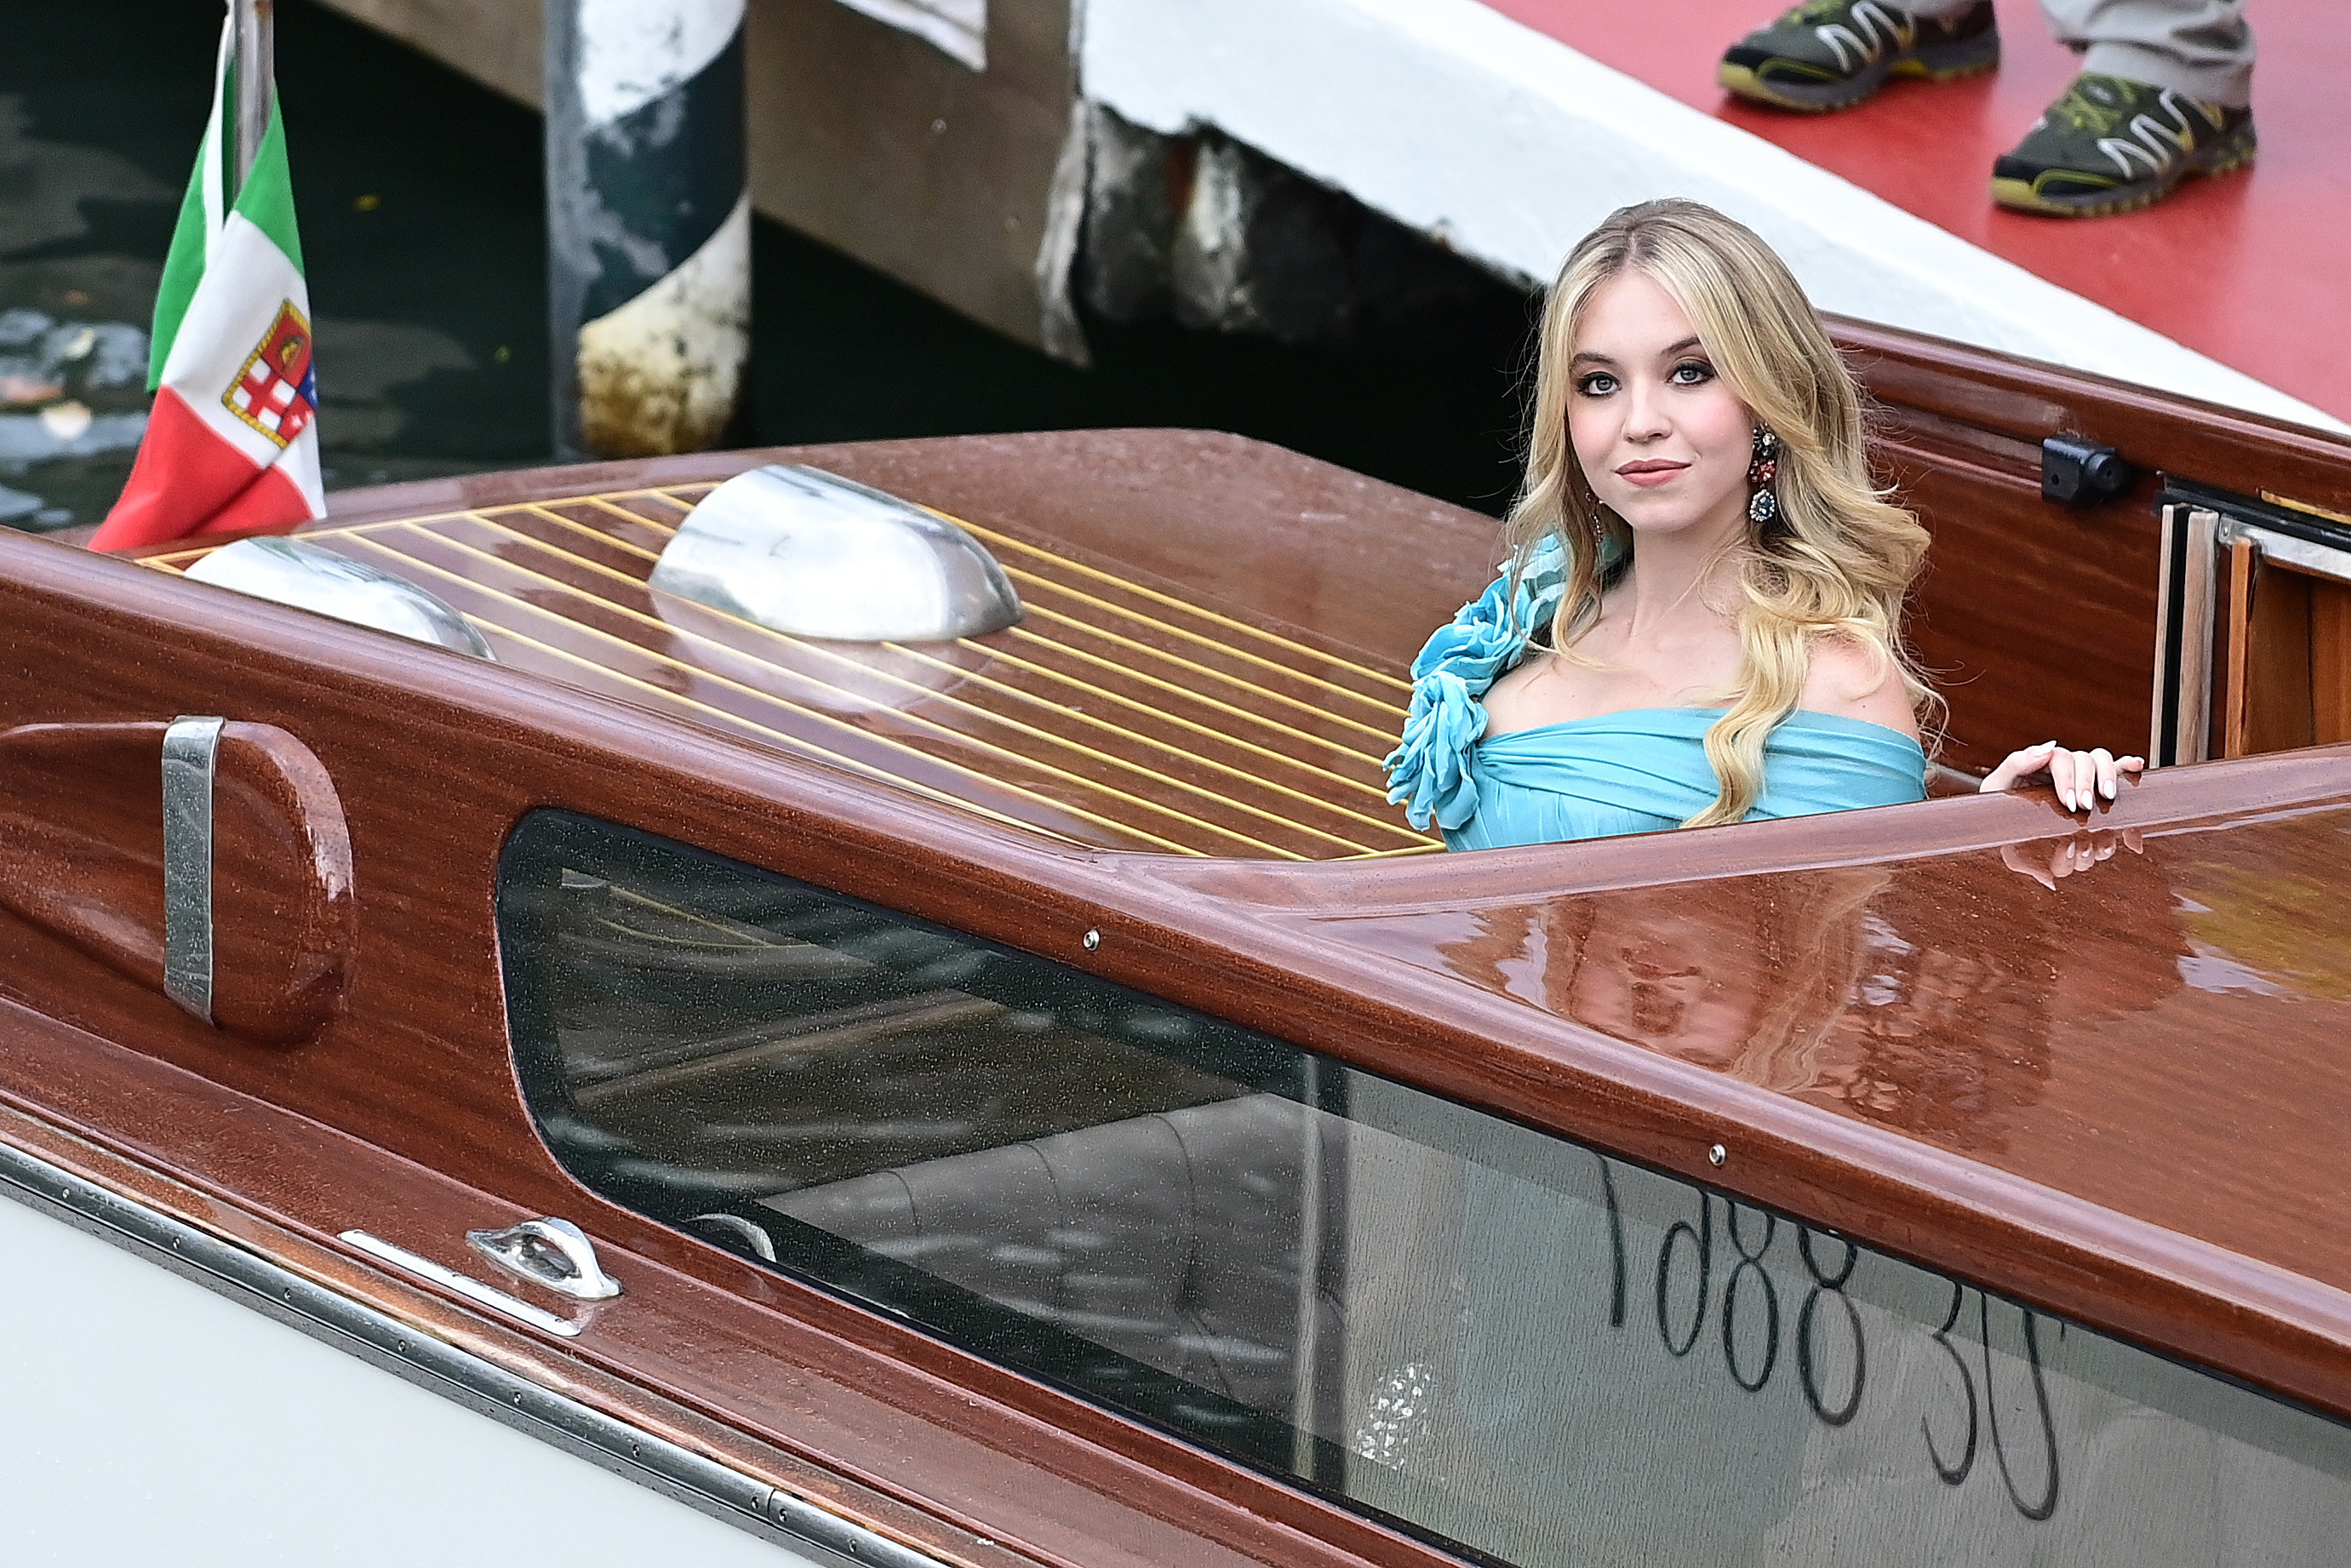 Sydney on a small luxurious boat at an event